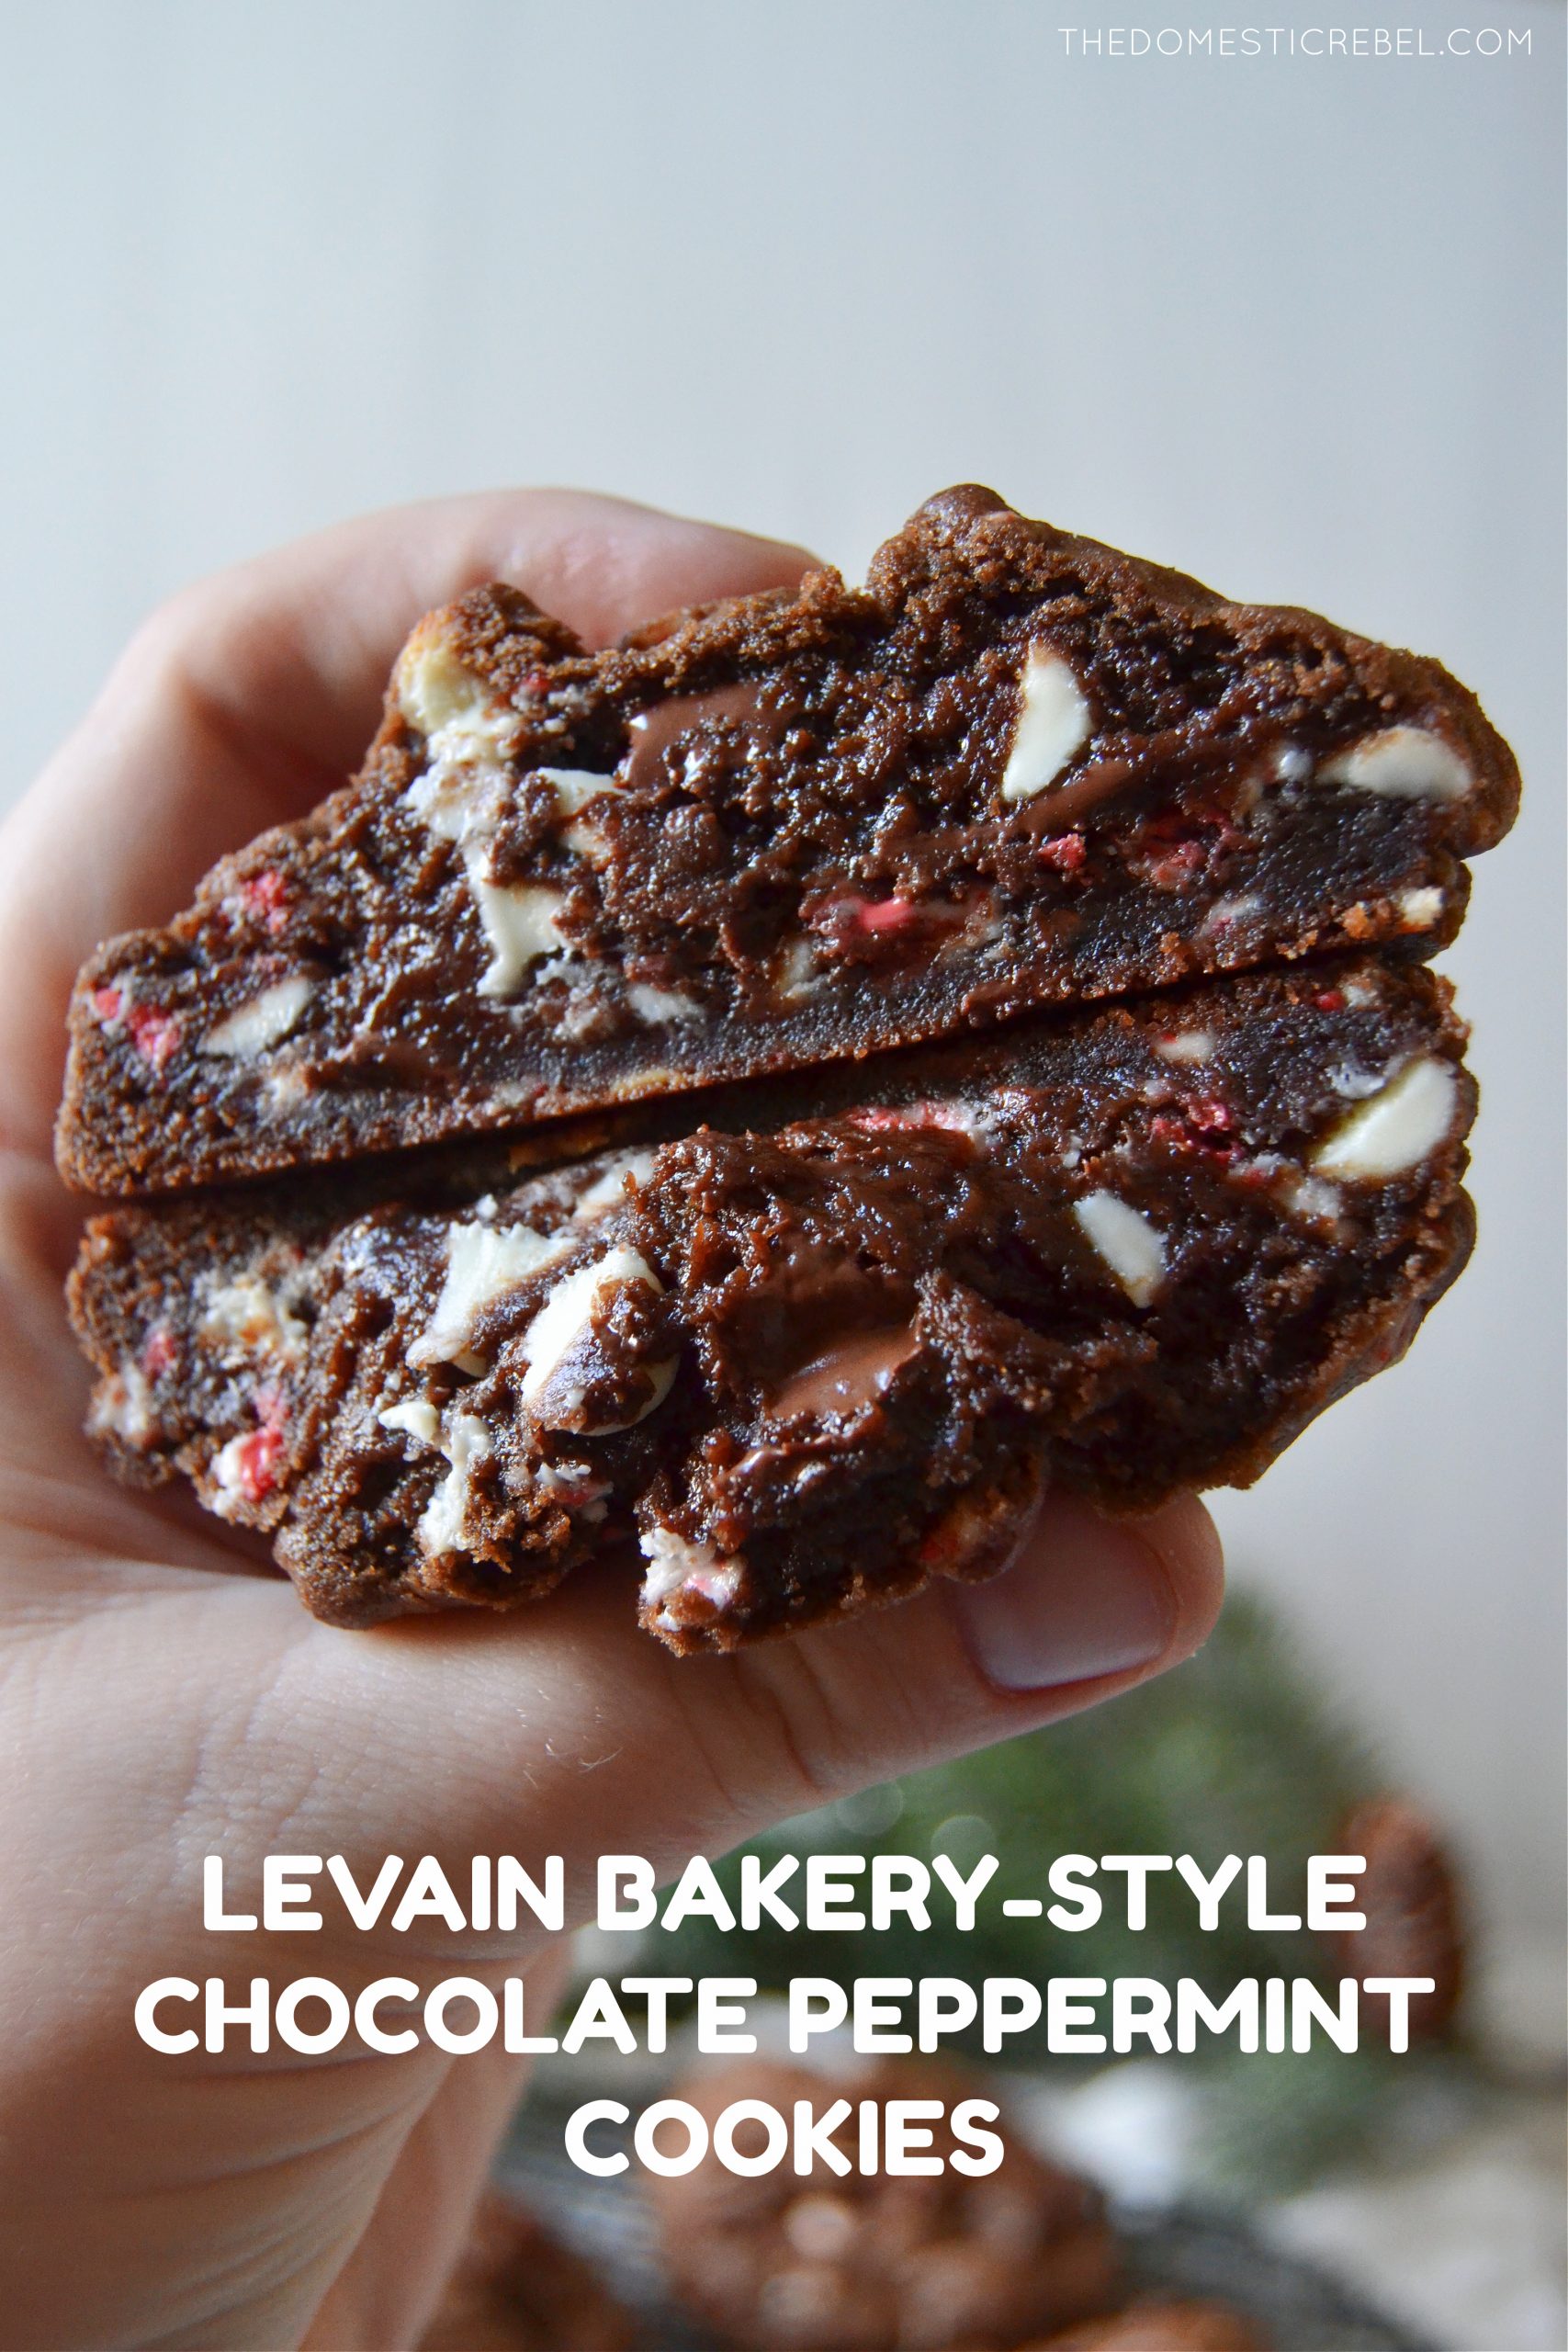 Levain Bakery launches new spring cookie flavor | amNewYork